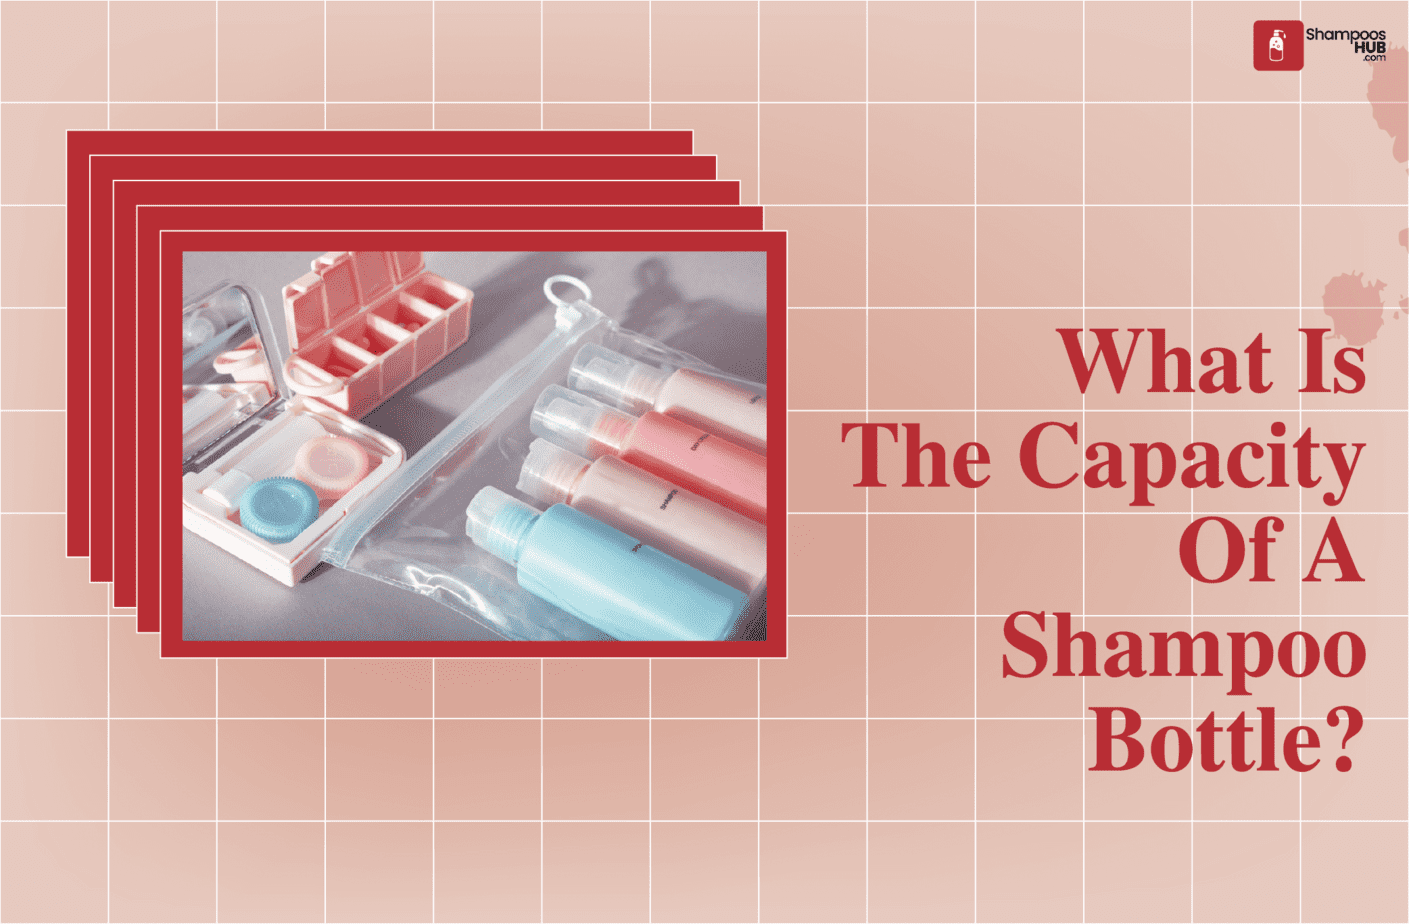 What Is The Capacity Of A Shampoo Bottle?